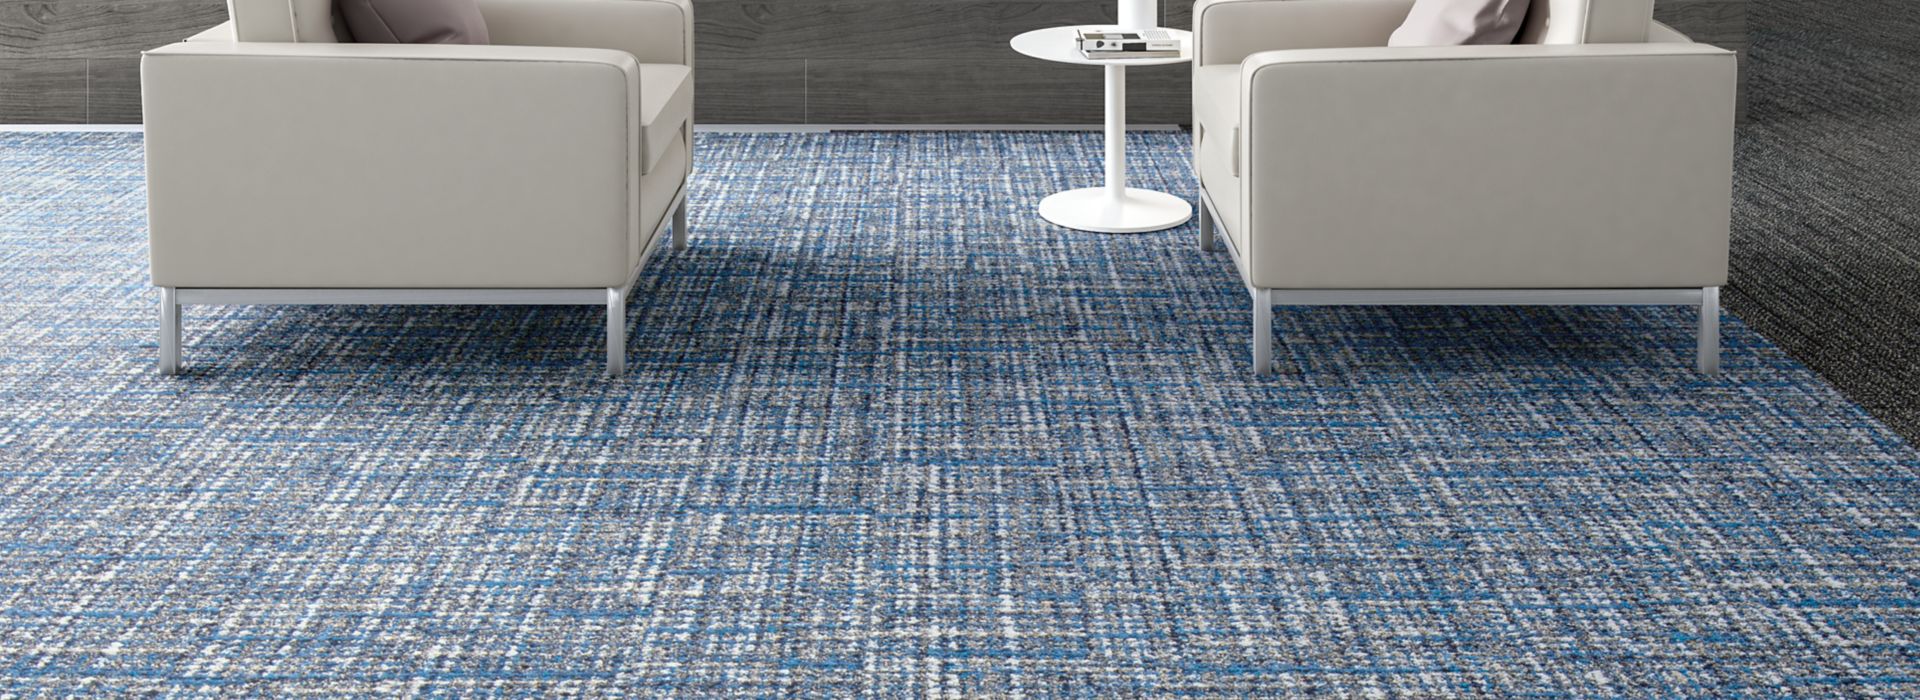 Interface WW895 plank carpet tile in lobby area with couches and side table  número de imagen 1